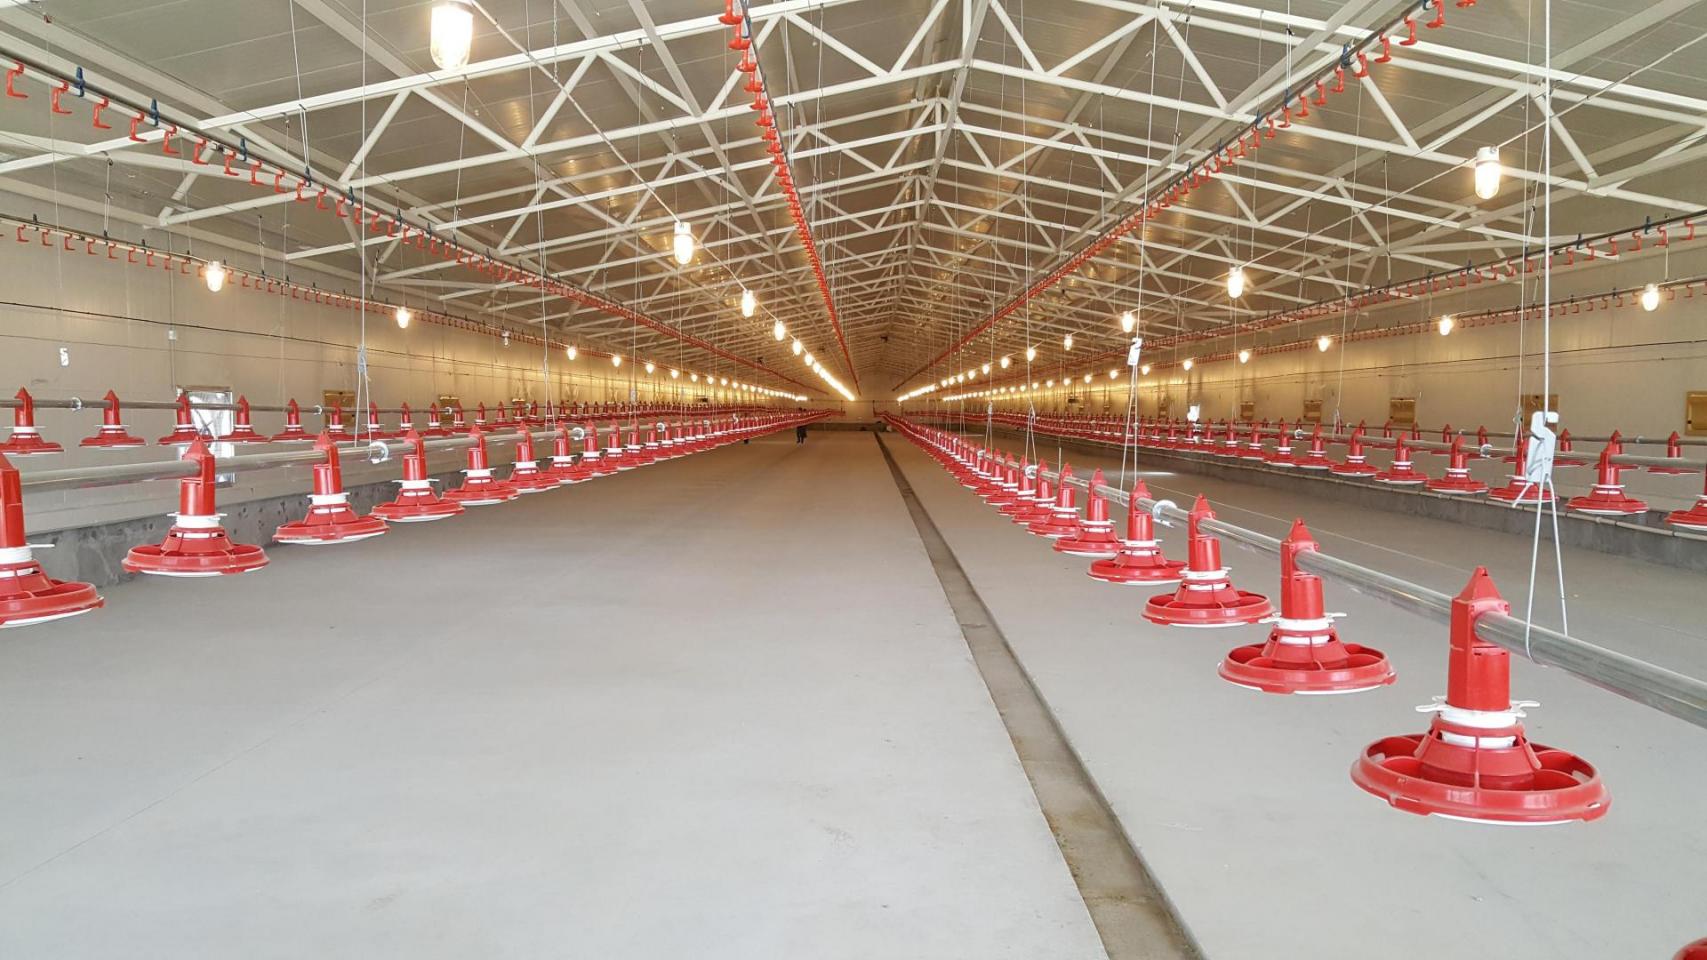 The building dimension  (115 x 15 meters)  makes it very suitable for tunnel ventilation. Each building is equipped with 5 Valènta feeding lines and 6 drinking nipple lines.